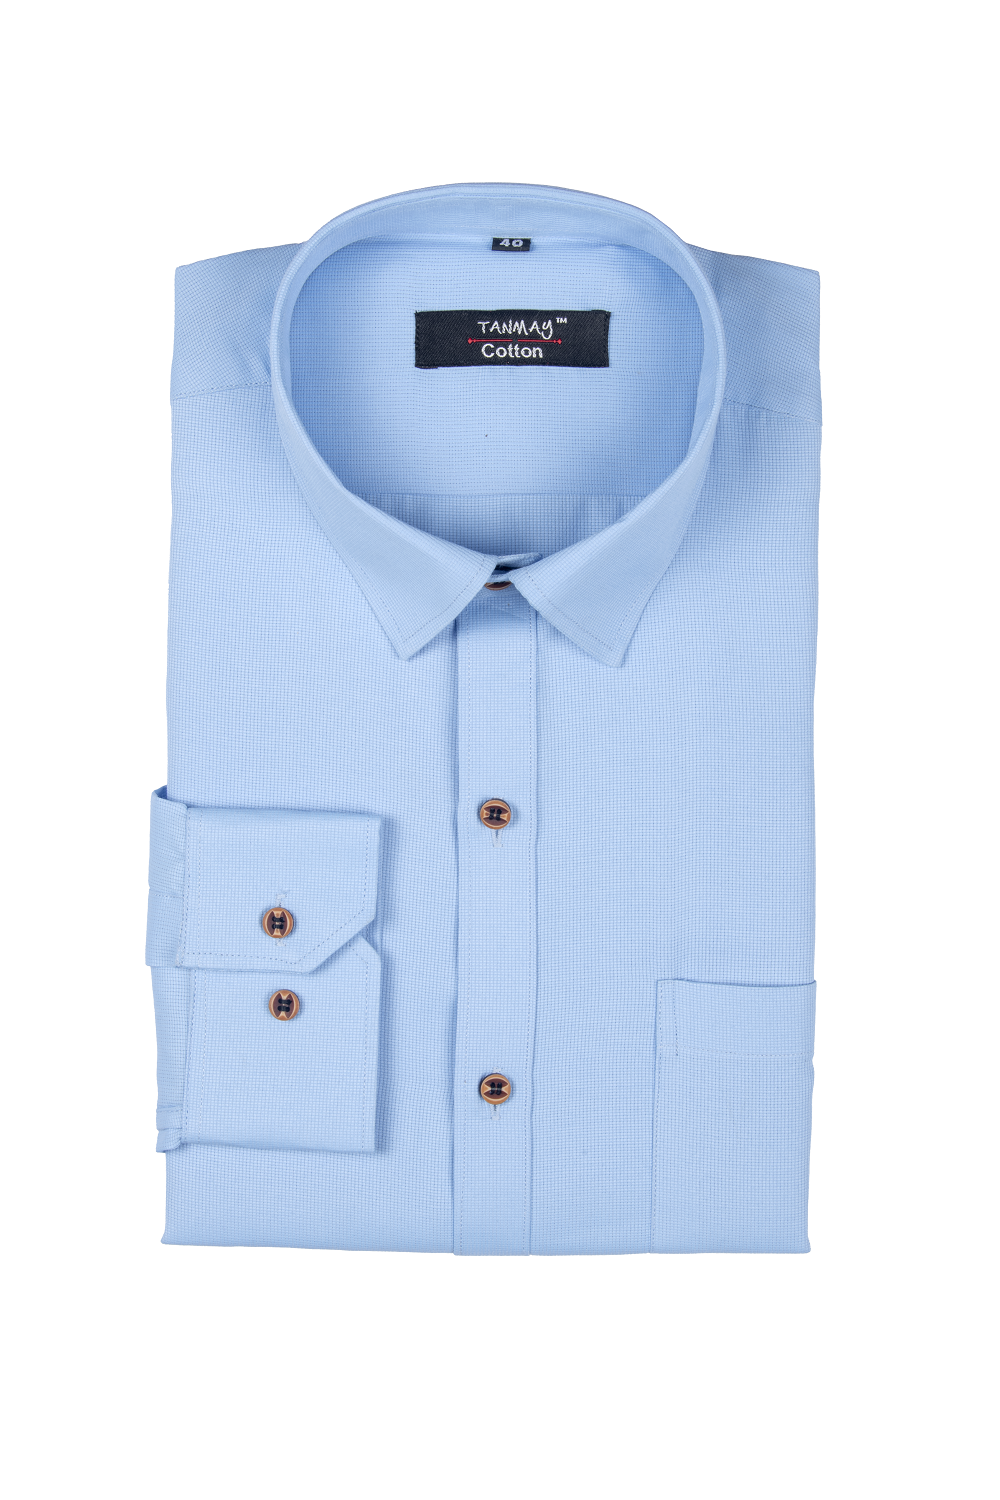 Cotton Tanmay Sky Blue Color Mercerised Cotton Shirt For Men's